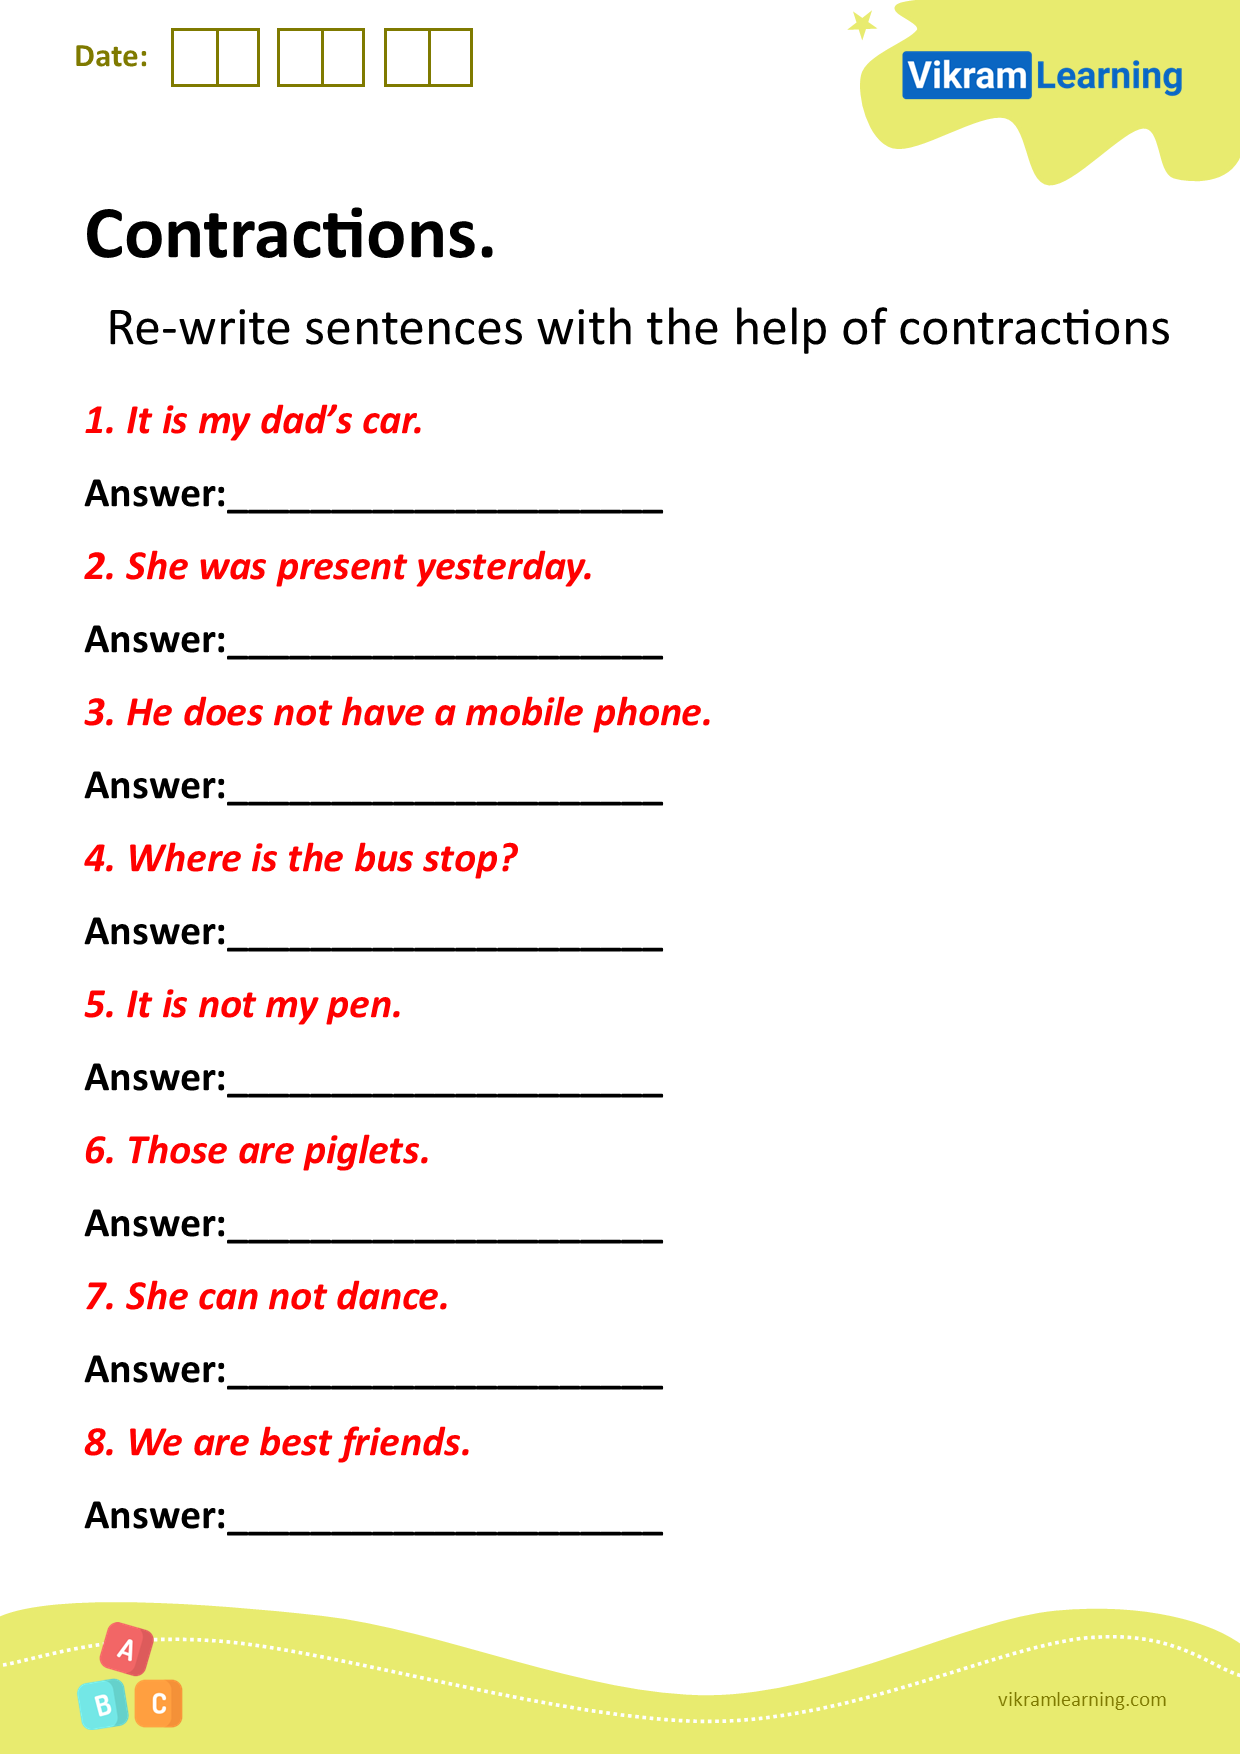 Download contractions worksheets